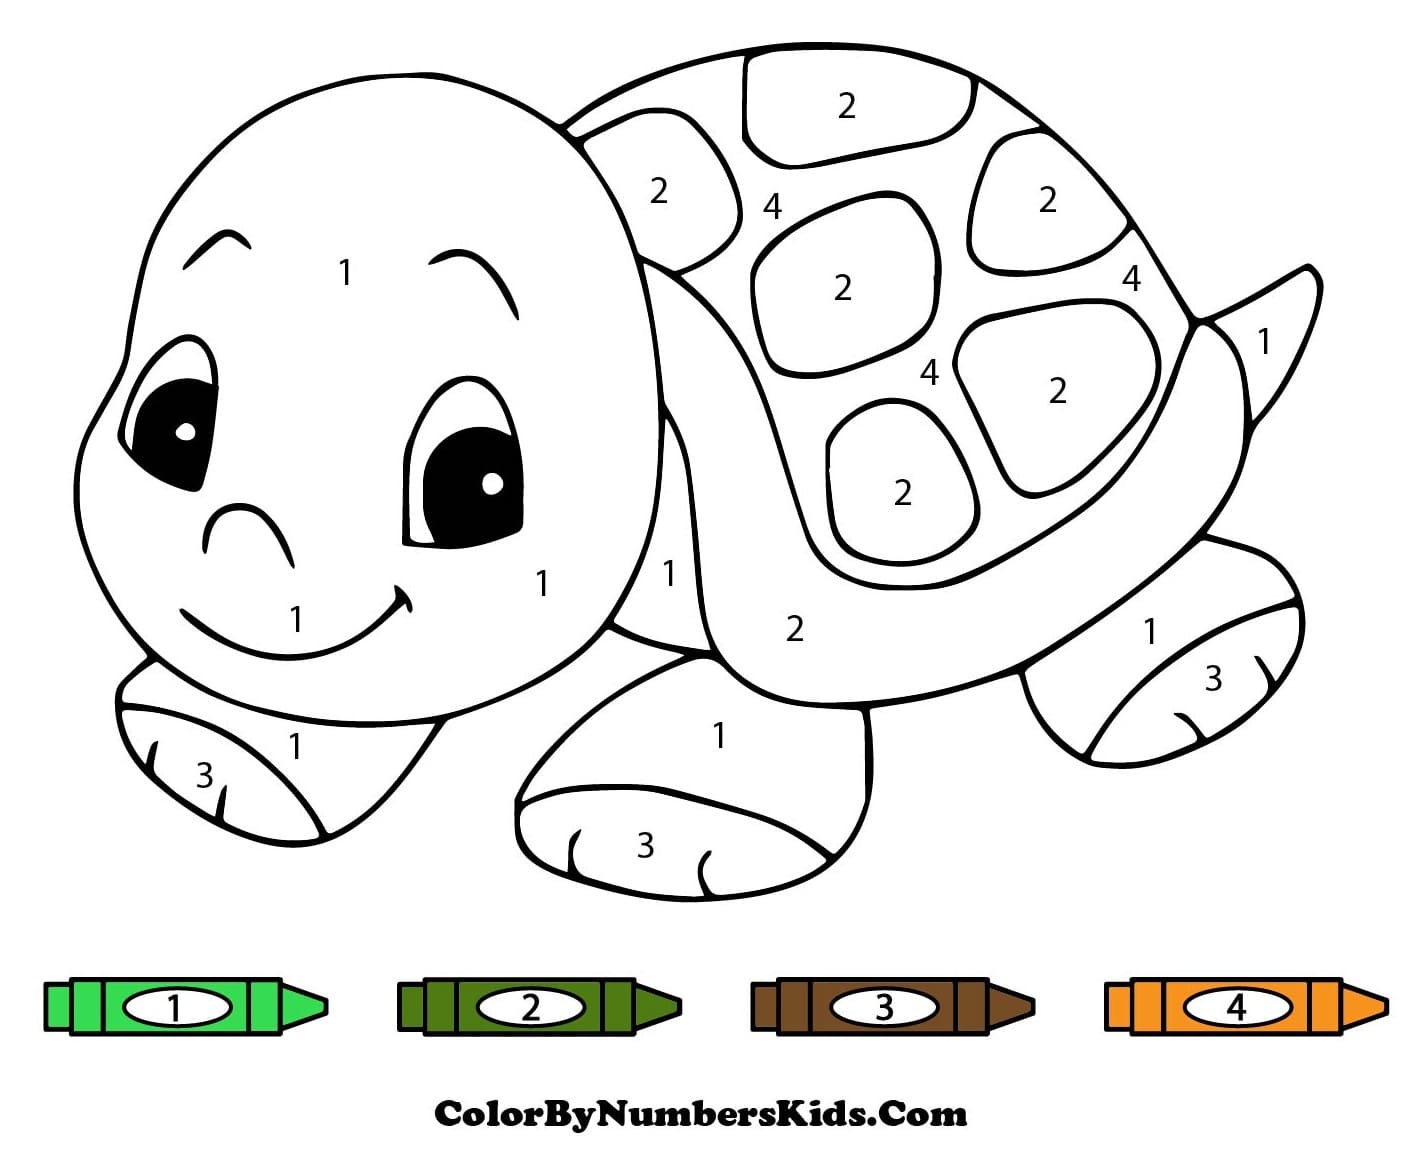 Baby Turtle Color By Number For Kids